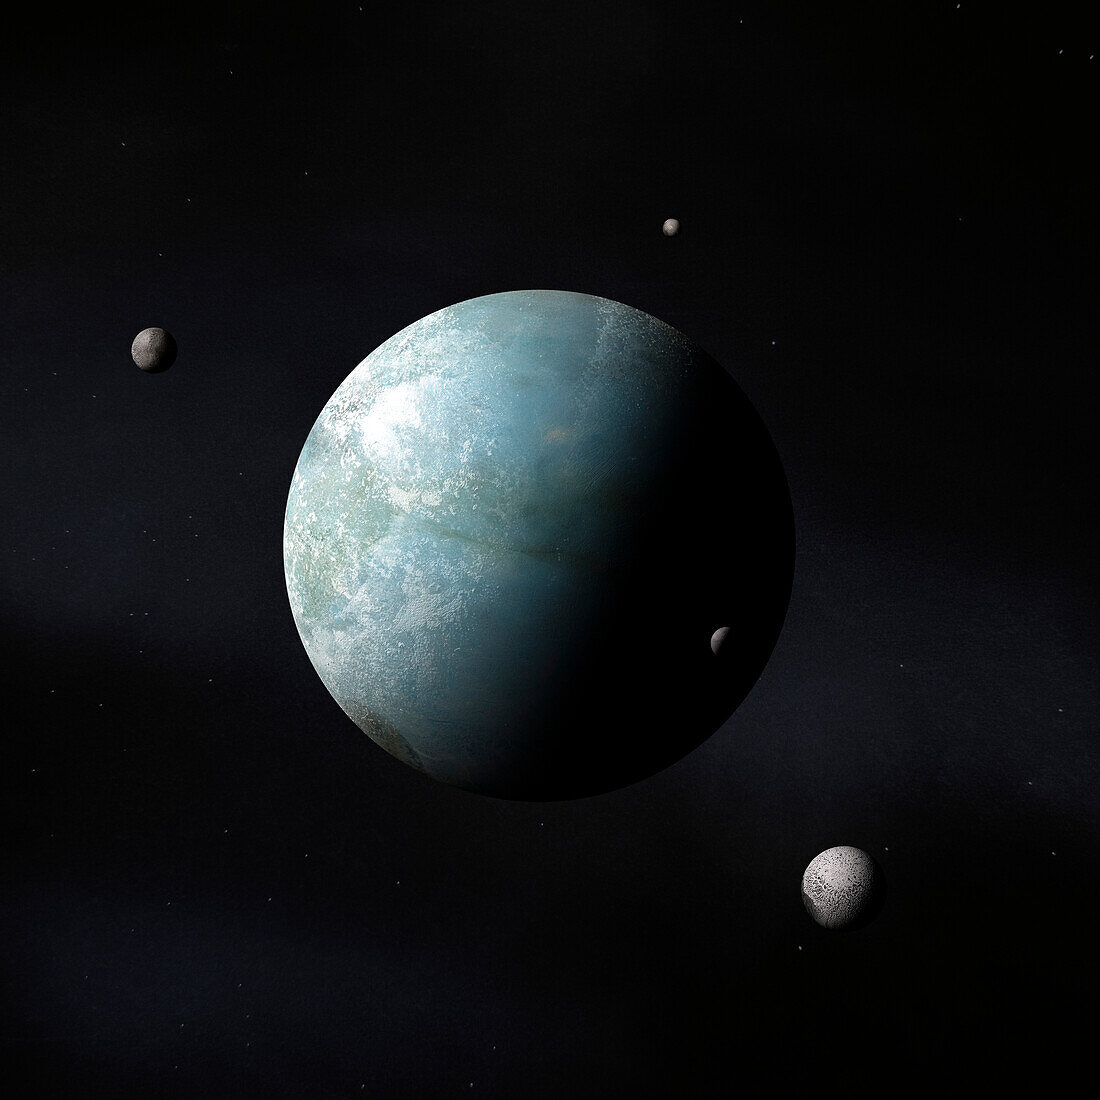 Earth-like planet surrounded by four moons, composite image